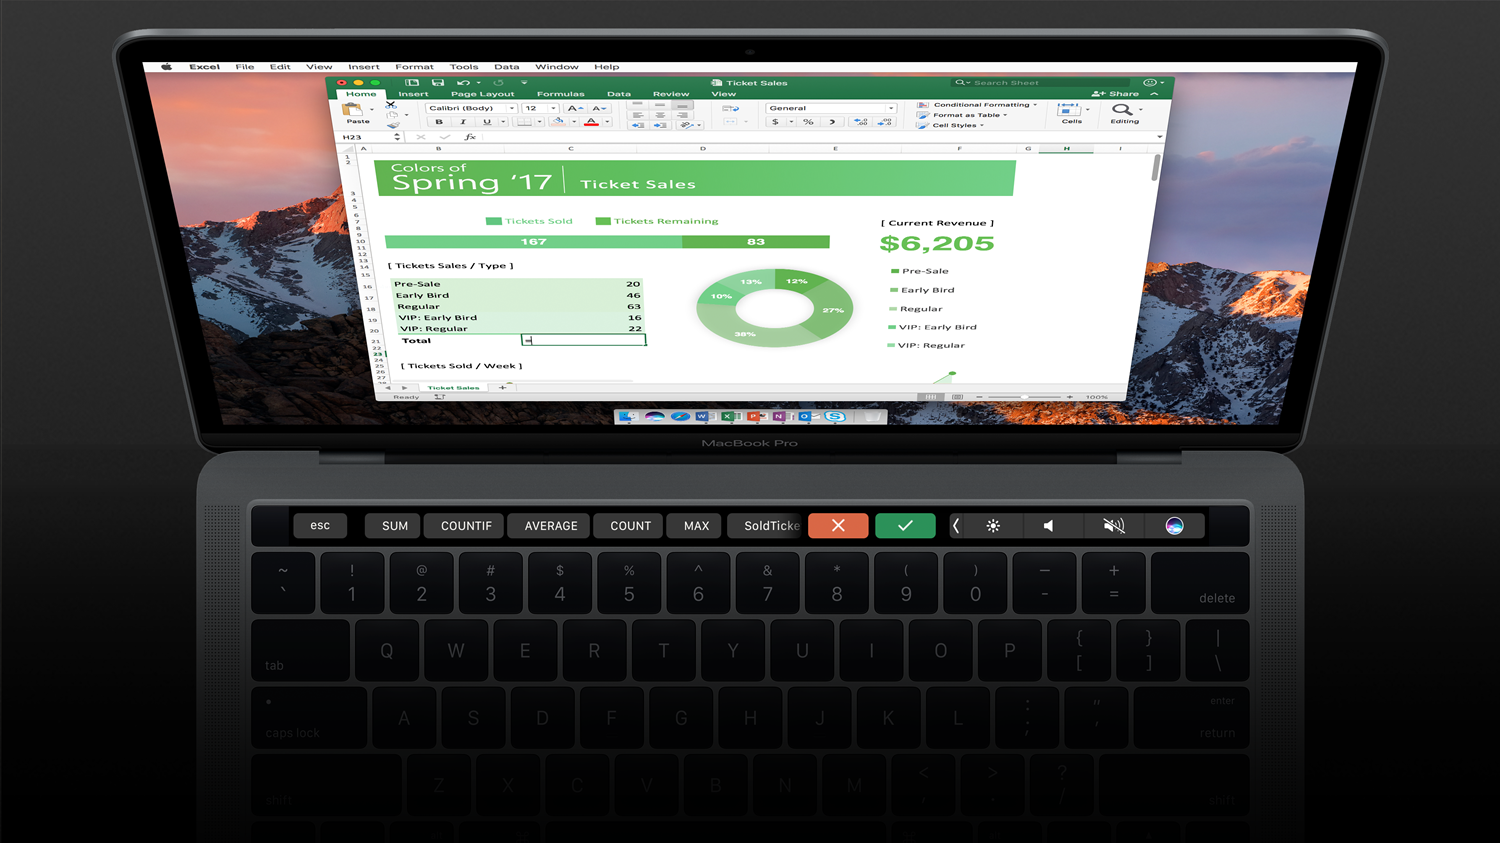 The image shows a Mac with touch bar enabled in Excel. The touch bar shows commonly used functions such as “SUM” that are related to the cell that is being selected within the spreadsheet.